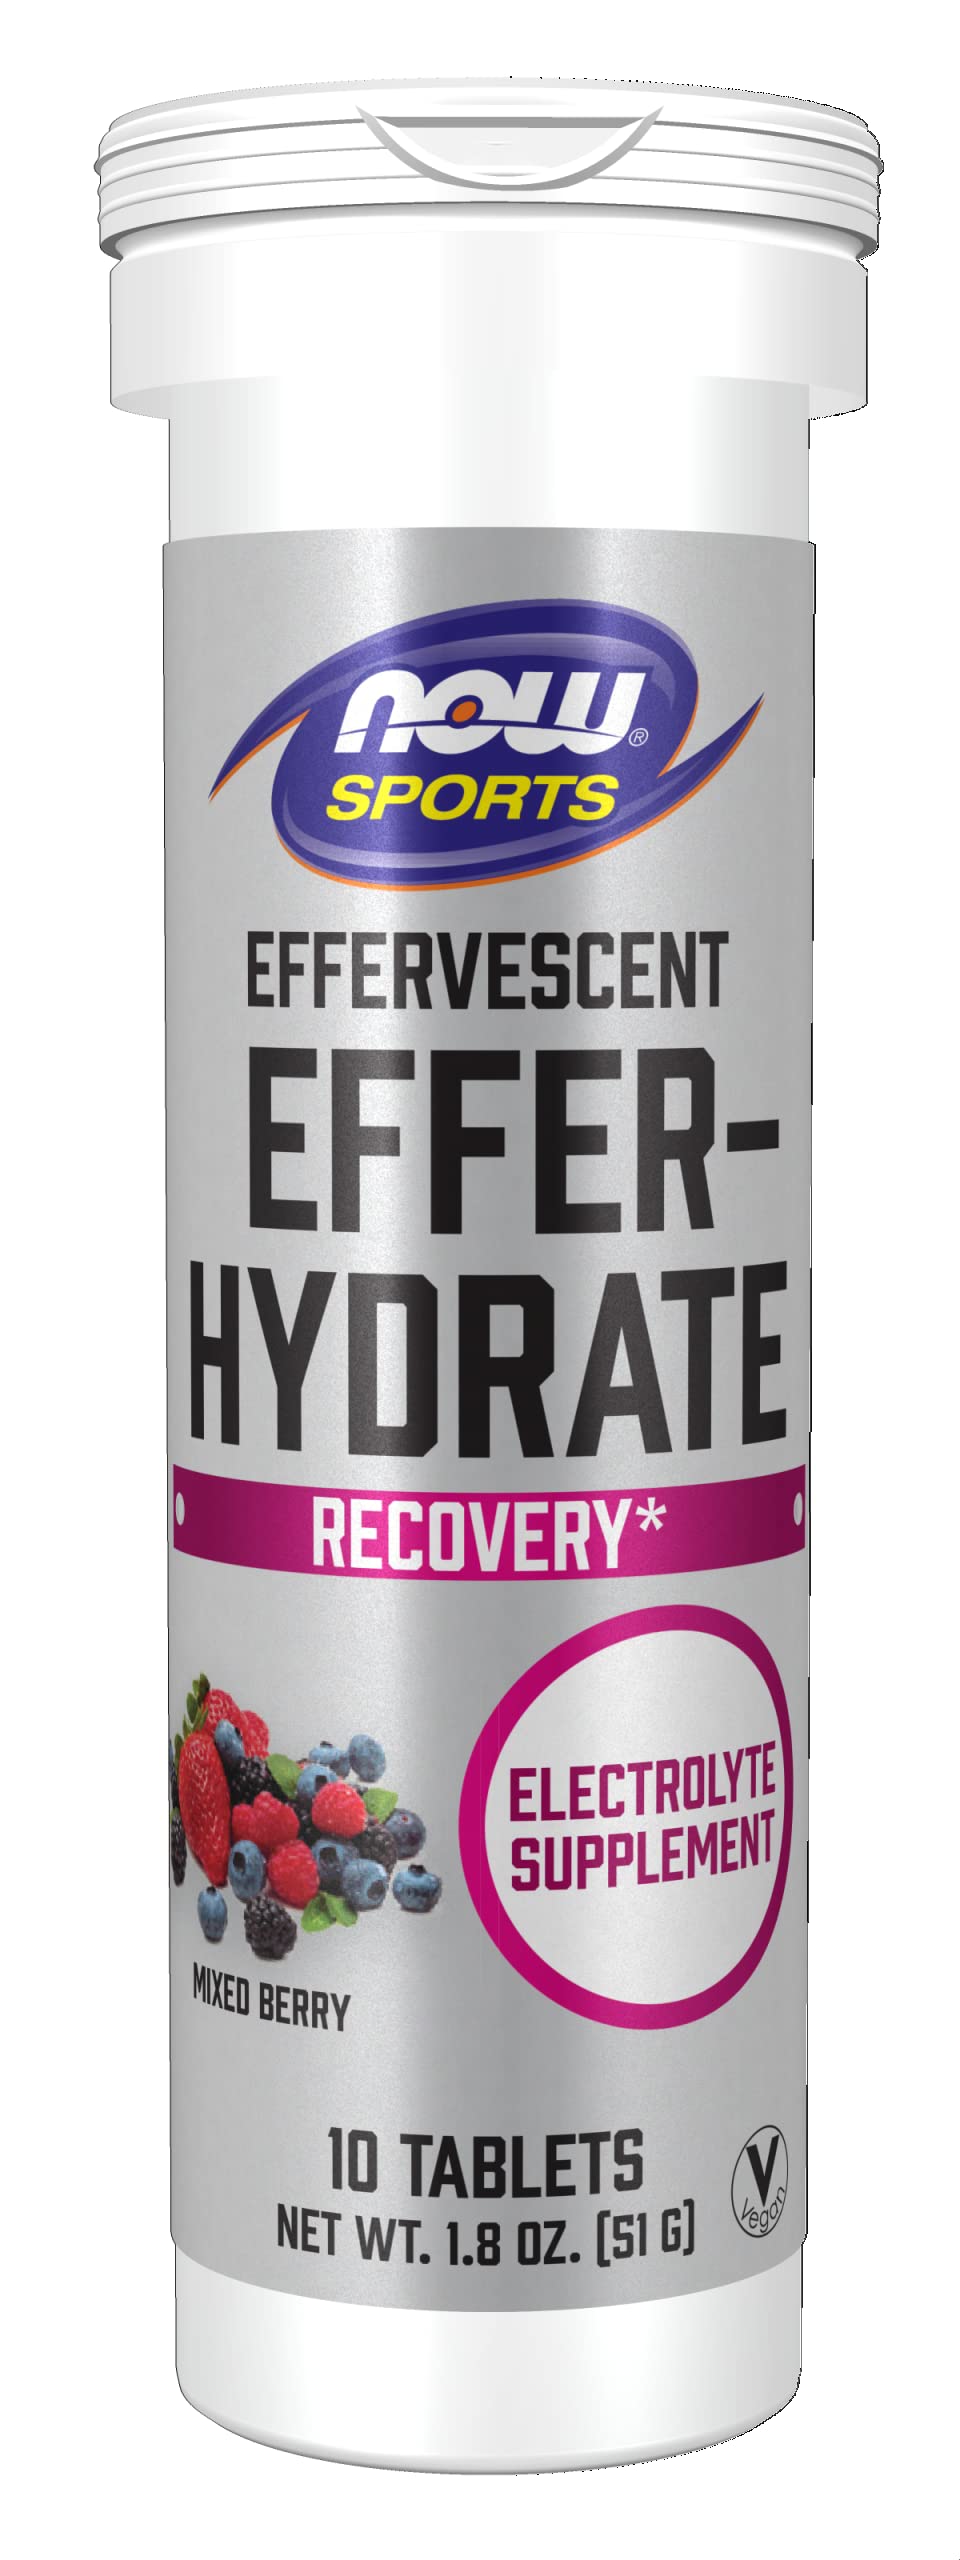 NOW Sports Nutrition, Effervescent Effer-Hydrate, Electrolyte Supplement, Recovery*, Mixed Berry, 10 Tablets